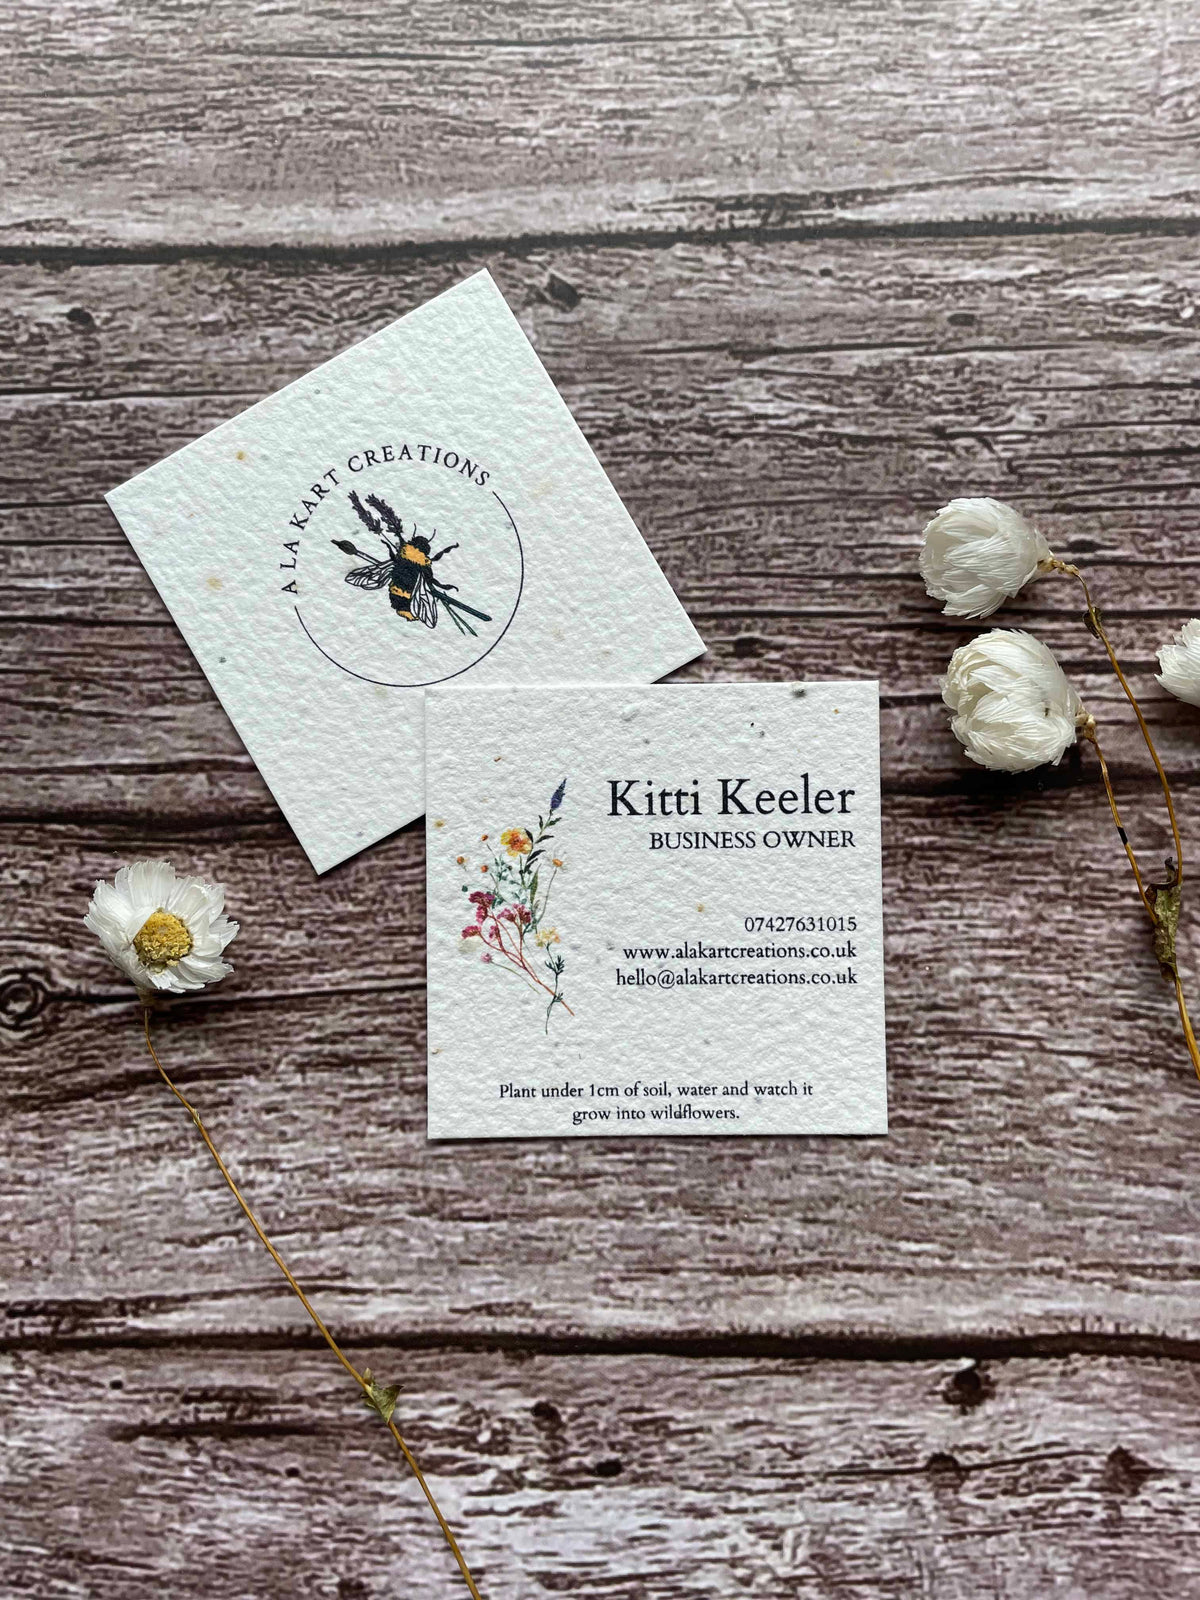 Plantable Square business cards with a wildflower design front